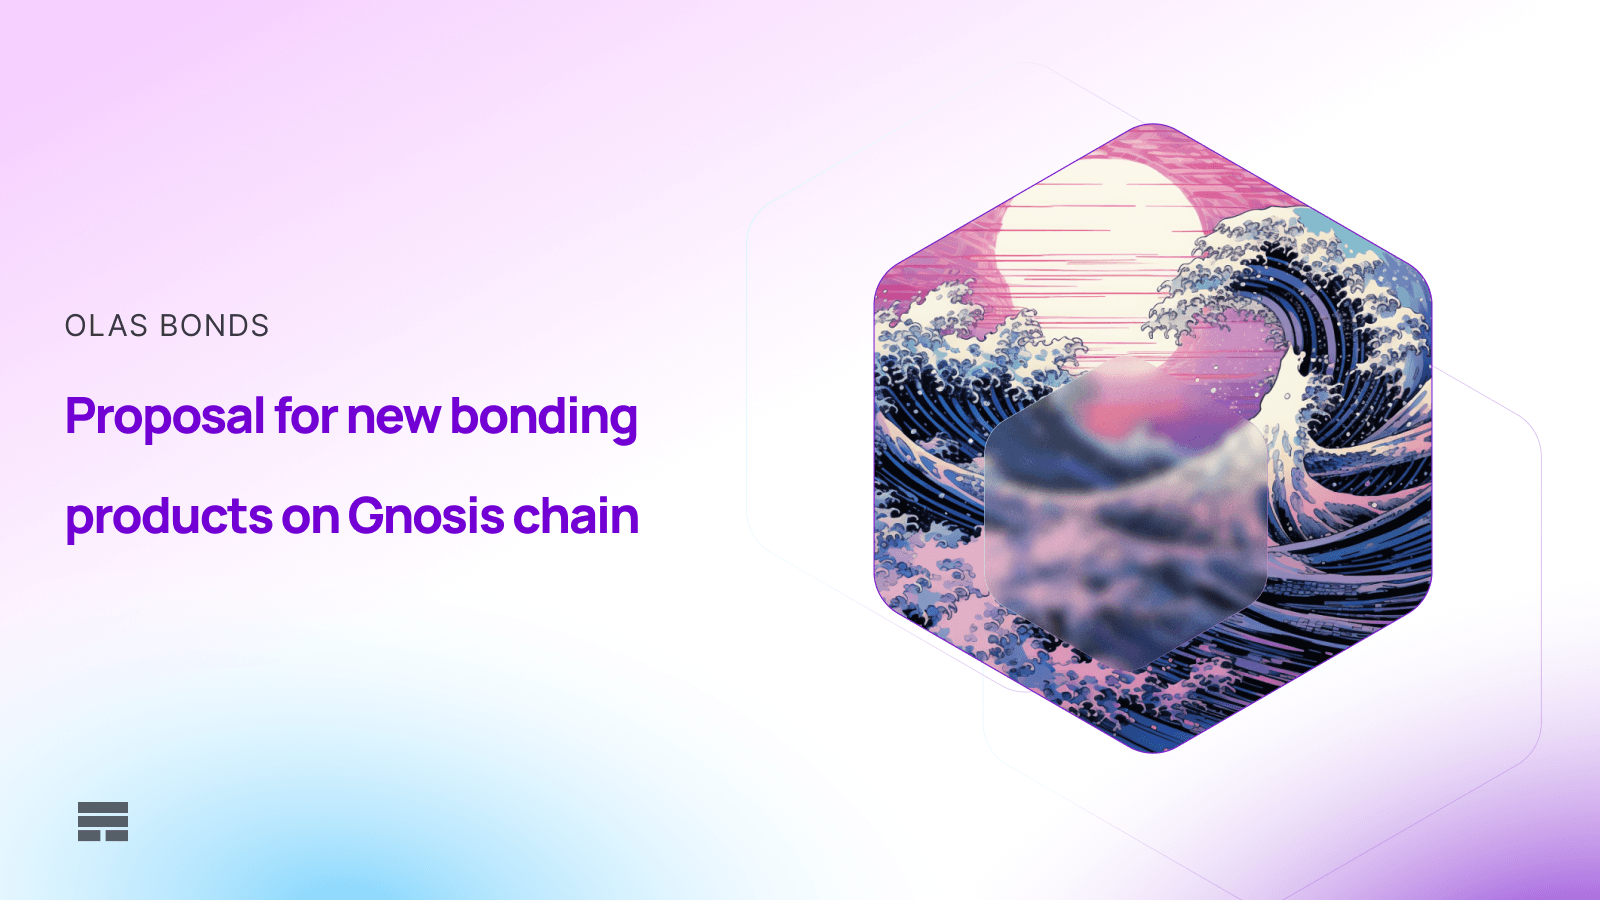 New bonding products on Gnosis Chain proposed background image